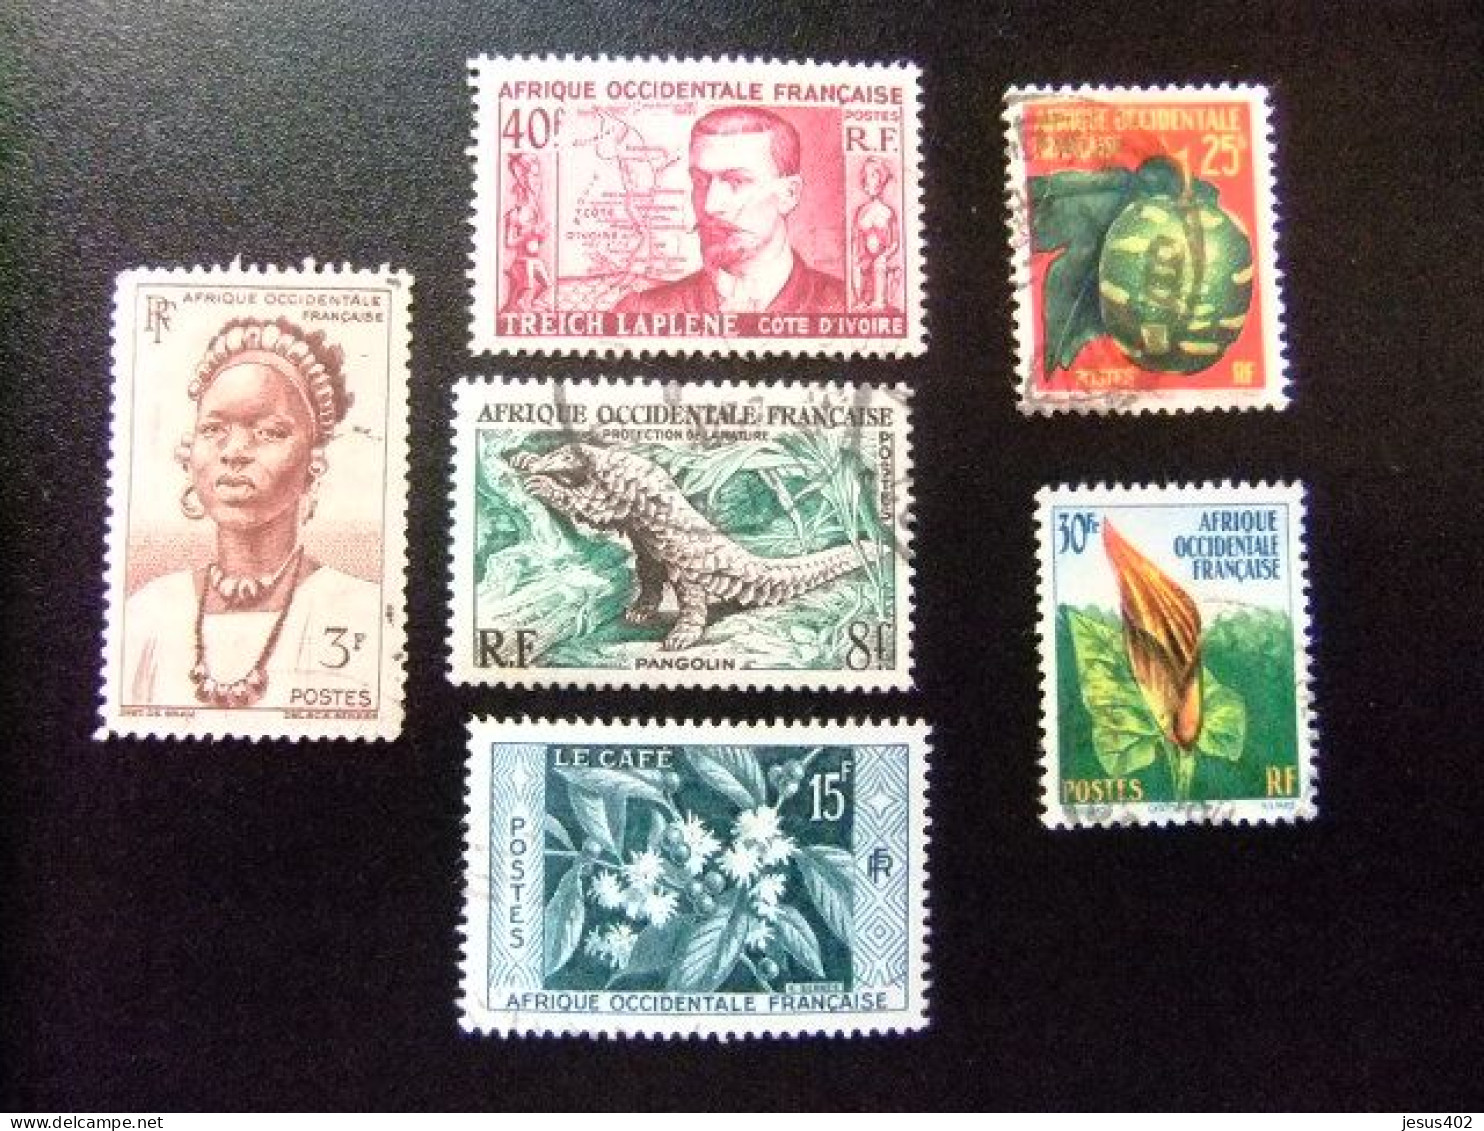 56 AFRIQUE OCCIDENTALE FRANCAISE (A.O.F.) / PEQUEÑO LOTE SELLOS / YVERT 34+52+47+62+69+70 FU - Used Stamps